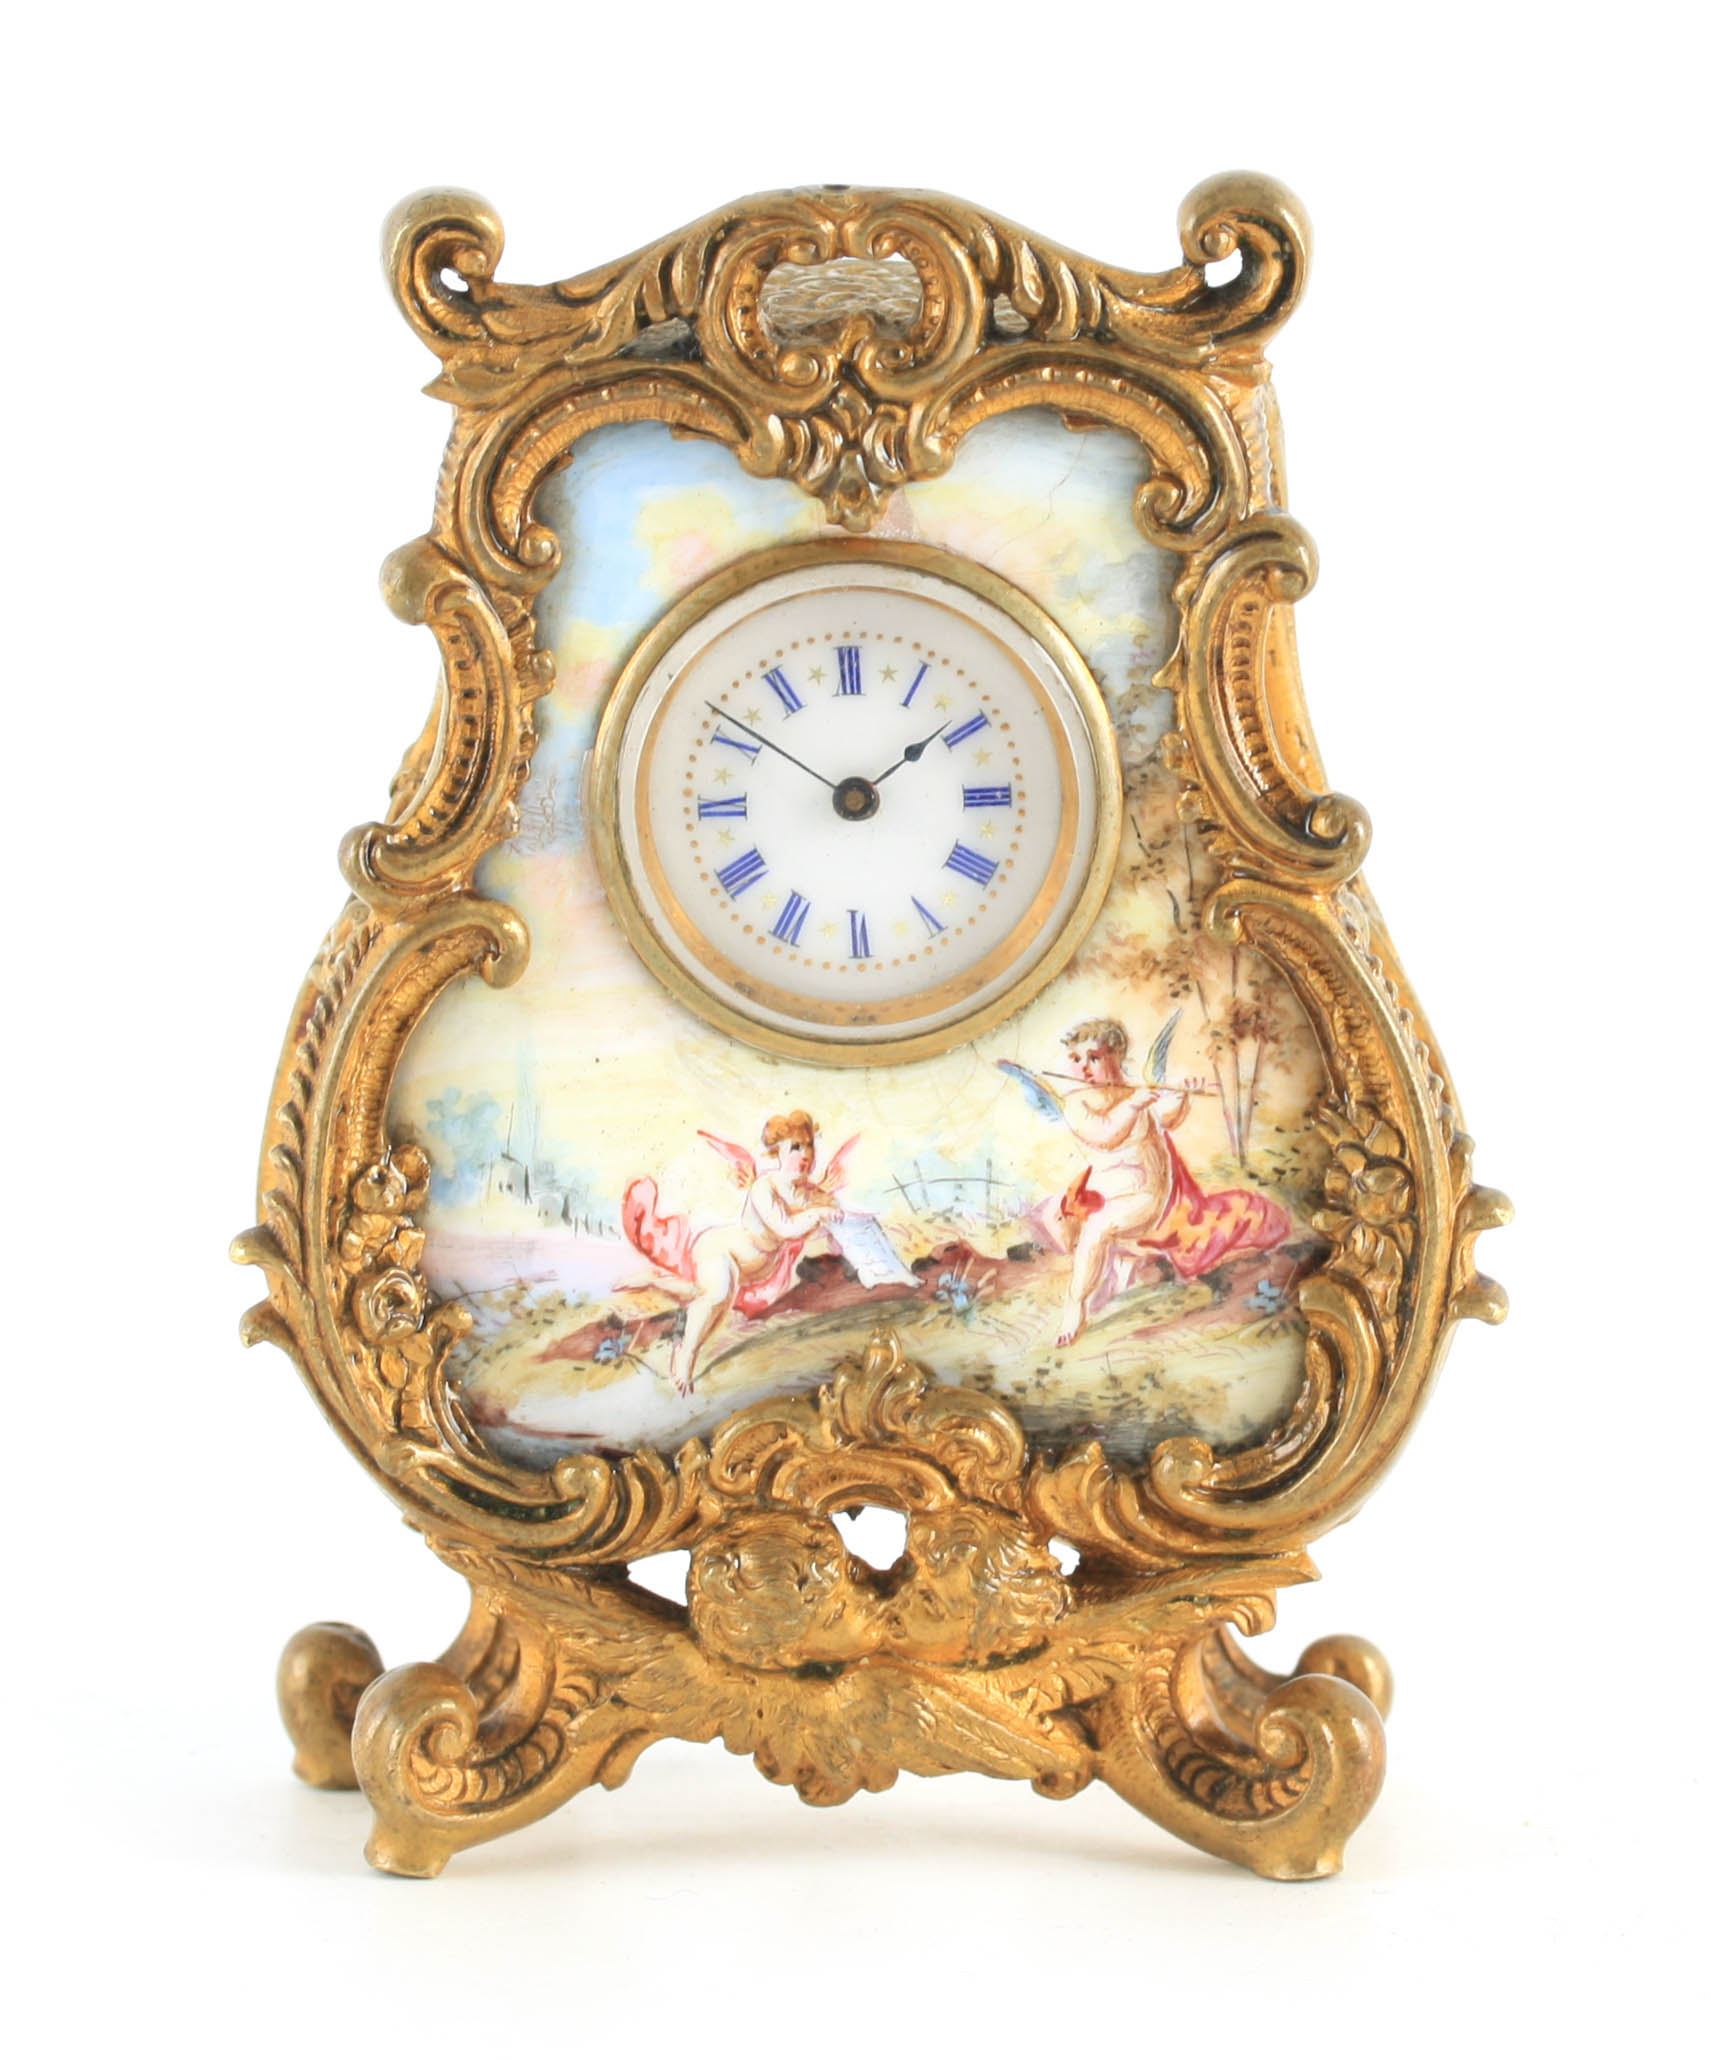 A LATE 19TH CENTURY VIENNESE ENAMEL AND GILT MOUNTED BOUDOIR CLOCK the bombe shaped case with rococo